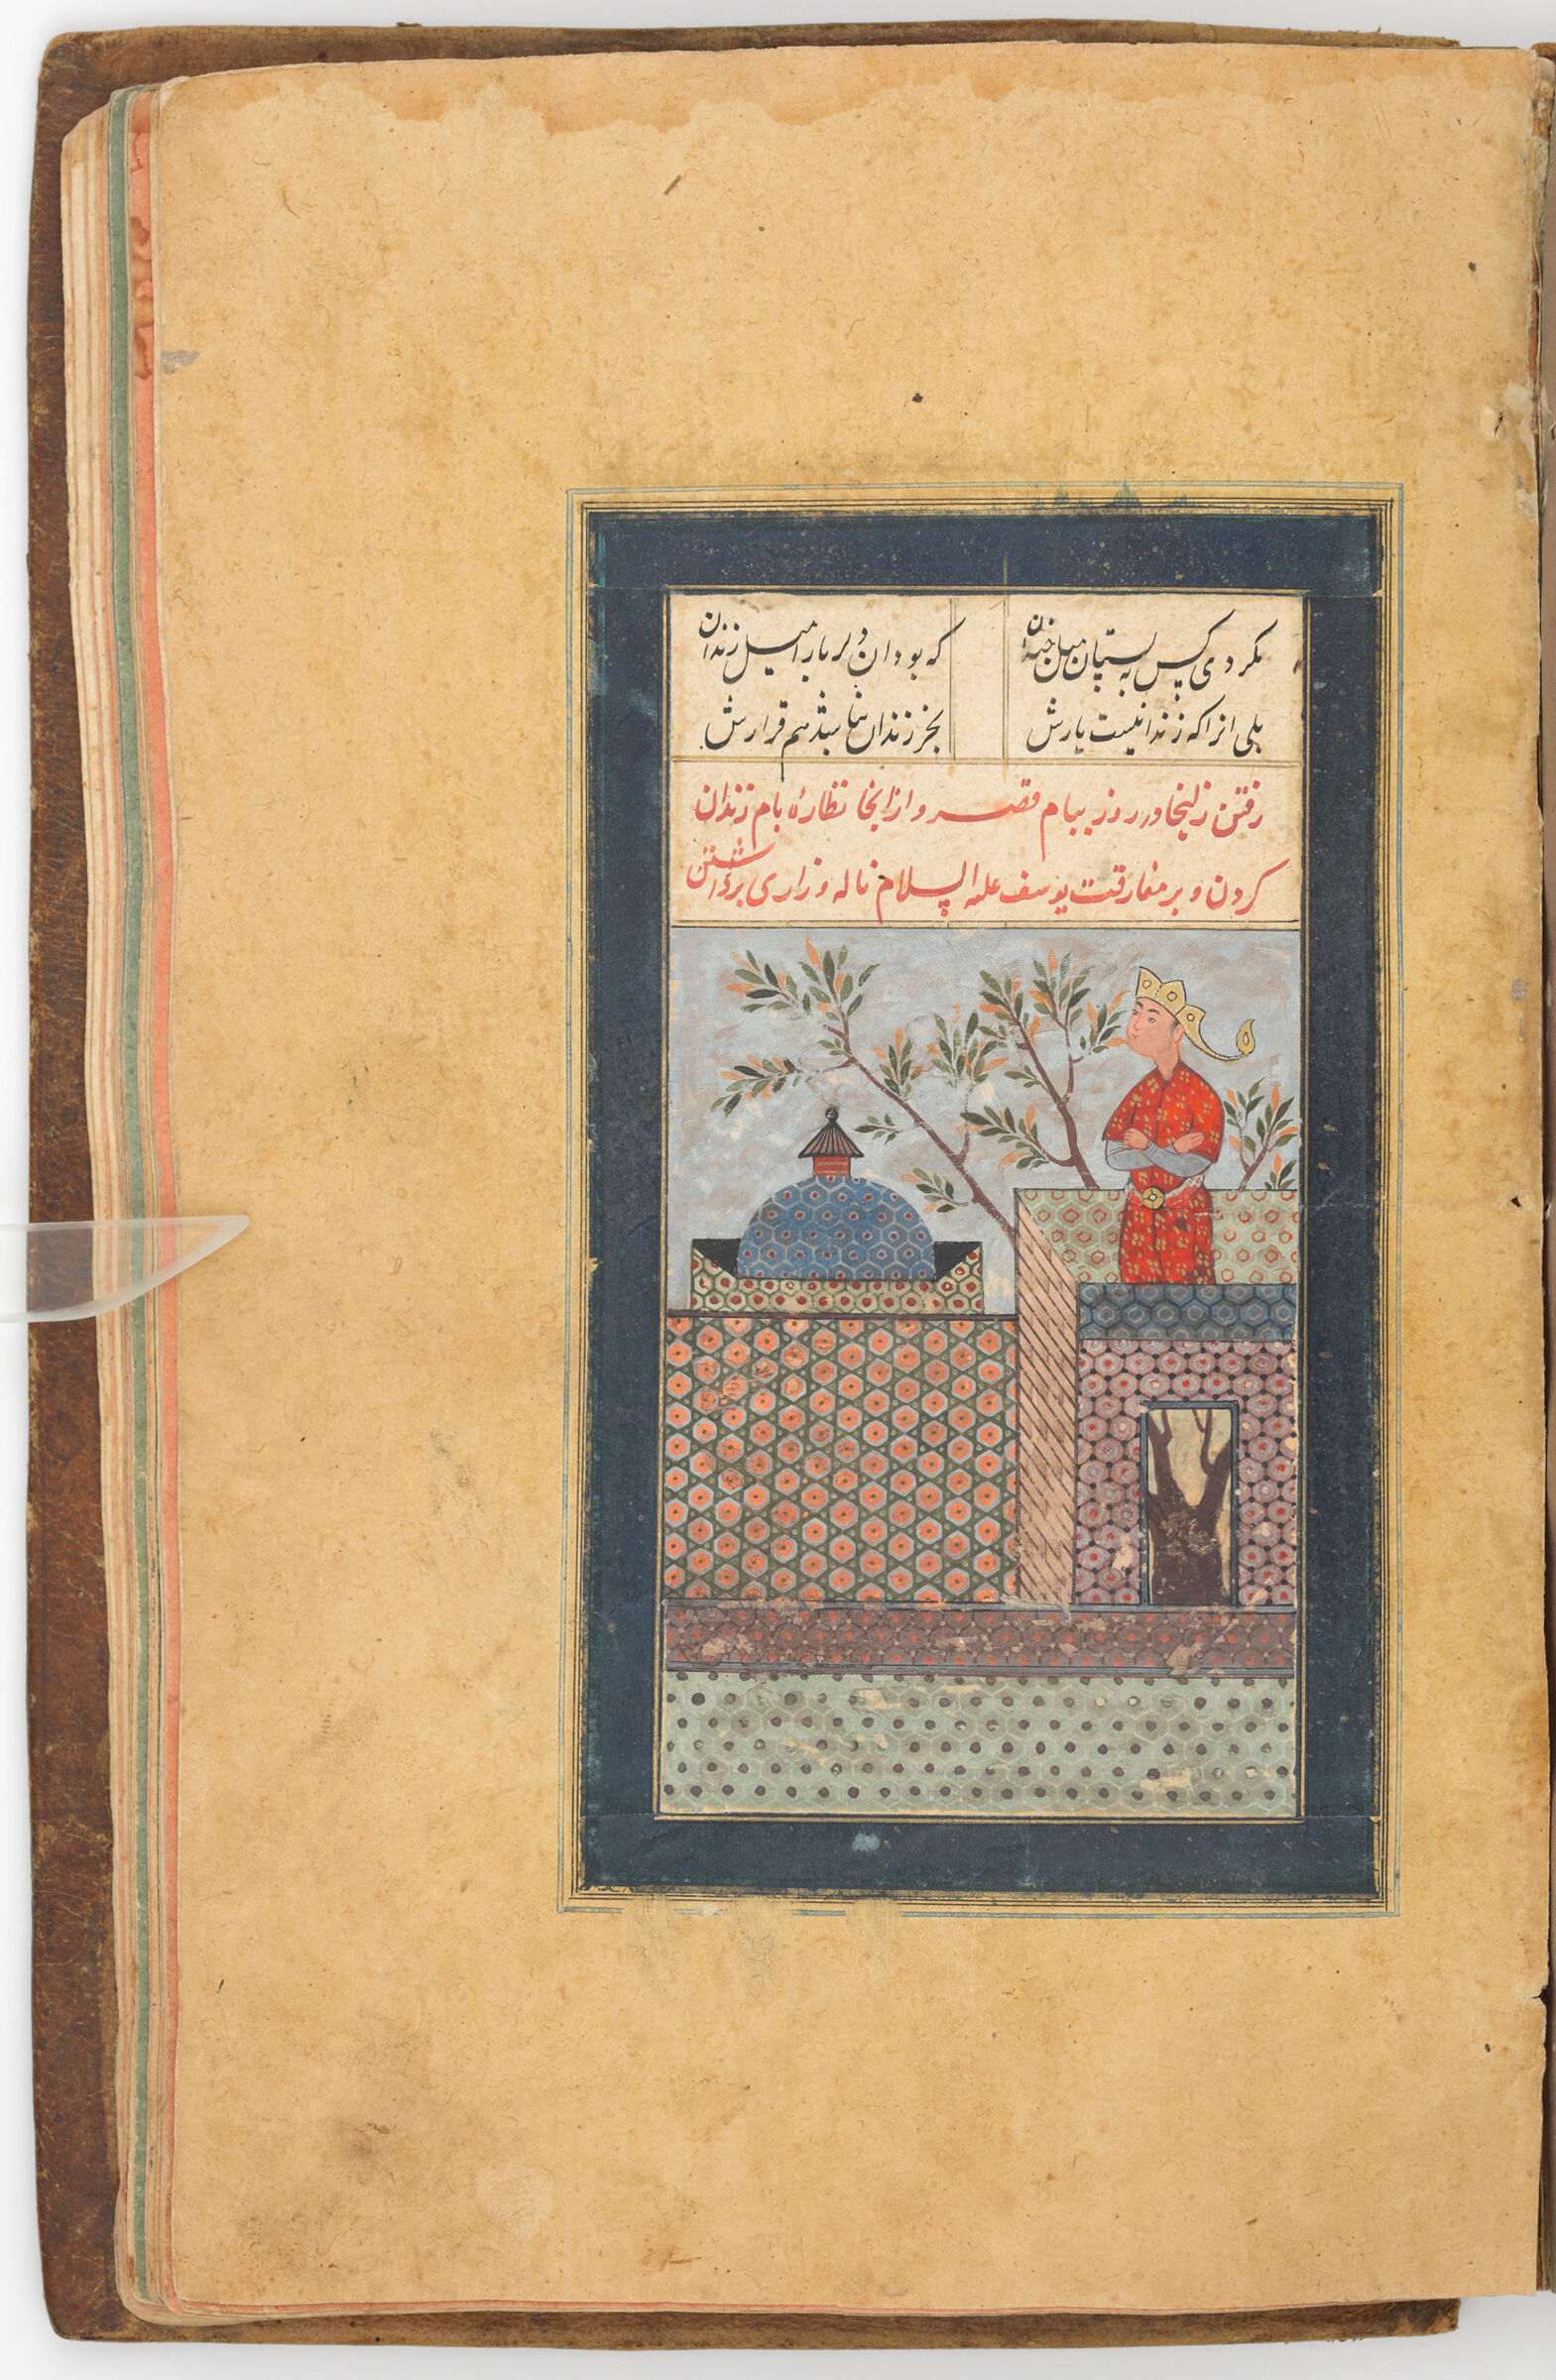 Zulaykha Looks At Yusuf’s Prison With A Sorrowful Heart (Painting Recto; Text Verso Of Folio 100); Illustrated Folio From A Manuscript Of Yusuf And Zulaykha By Nizami